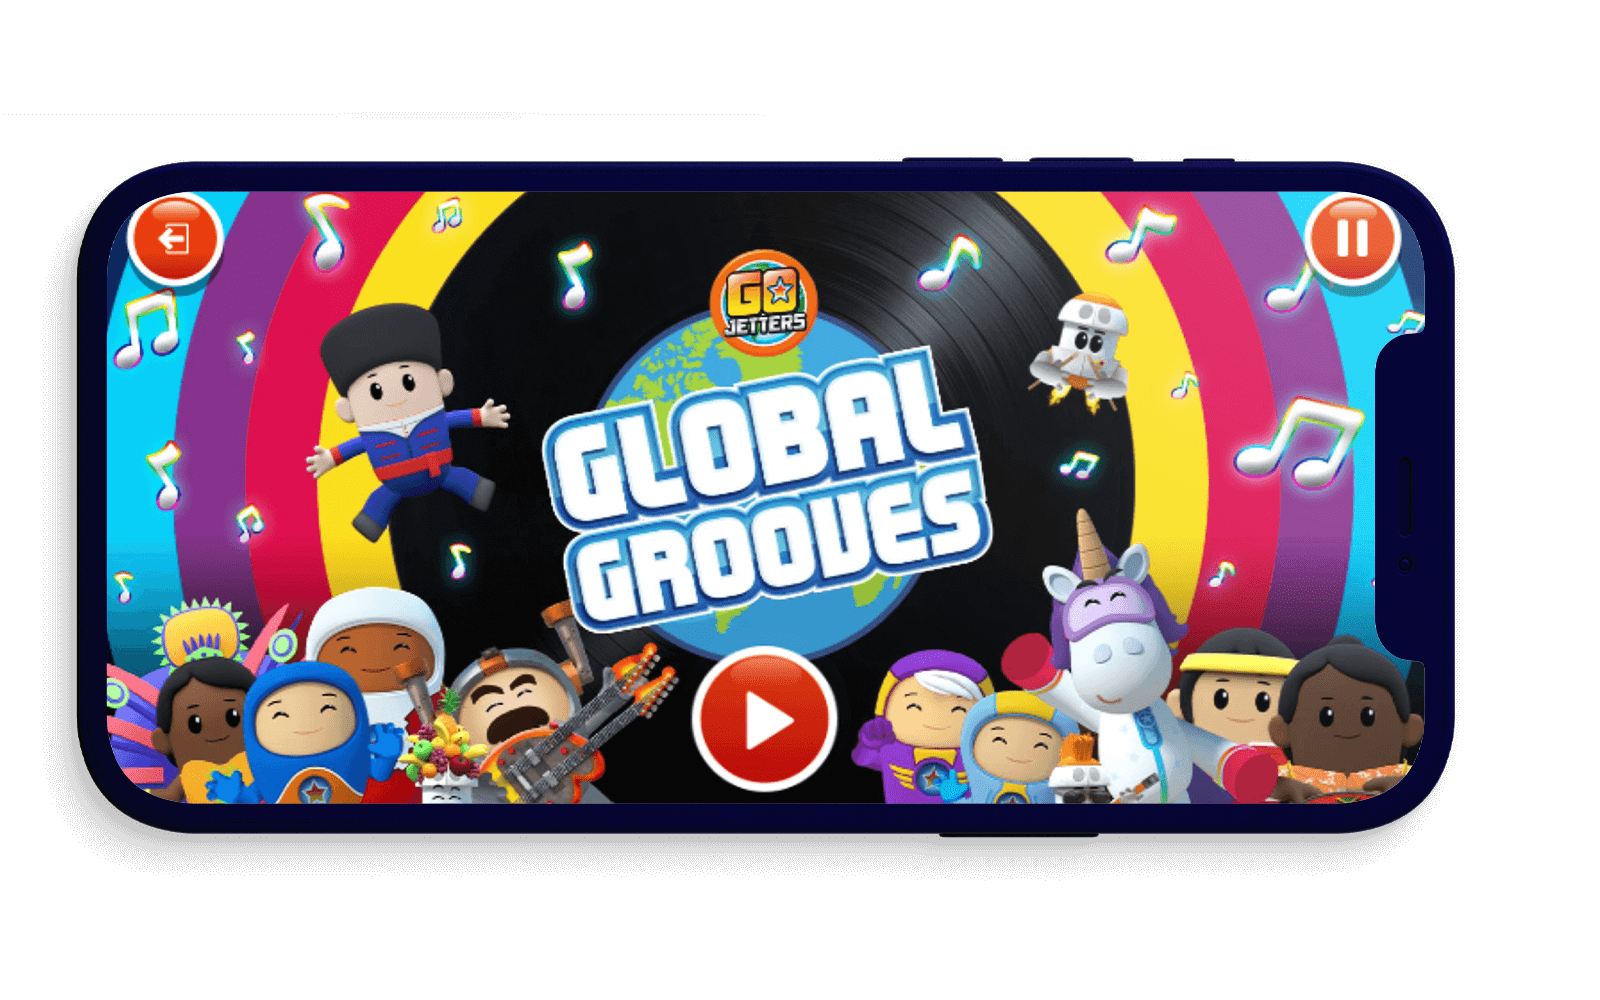 Global Grooves game on a phone